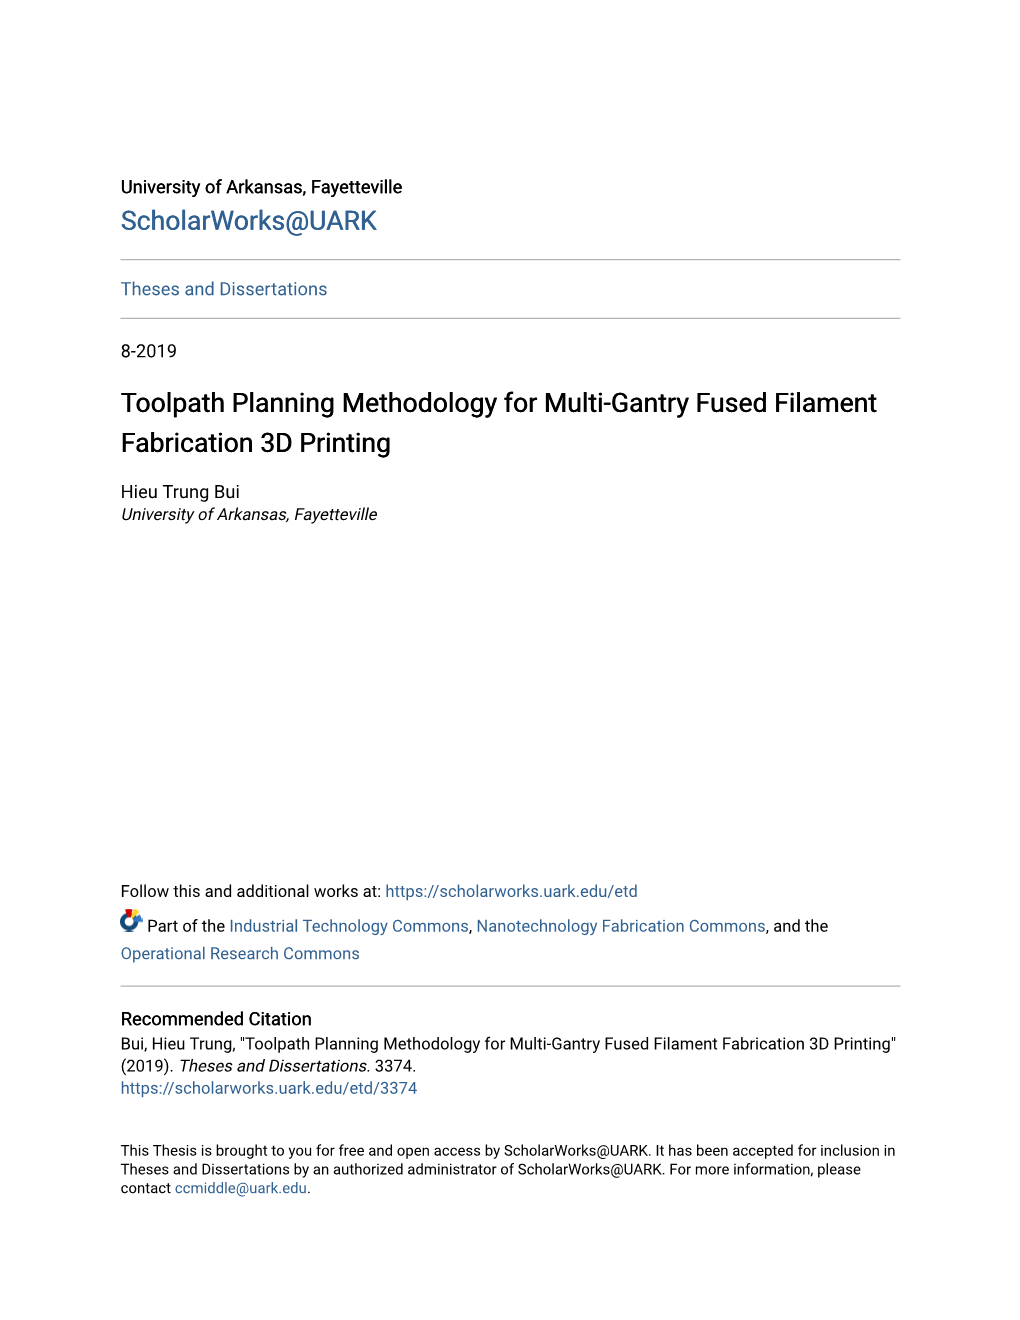 Toolpath Planning Methodology for Multi-Gantry Fused Filament Fabrication 3D Printing